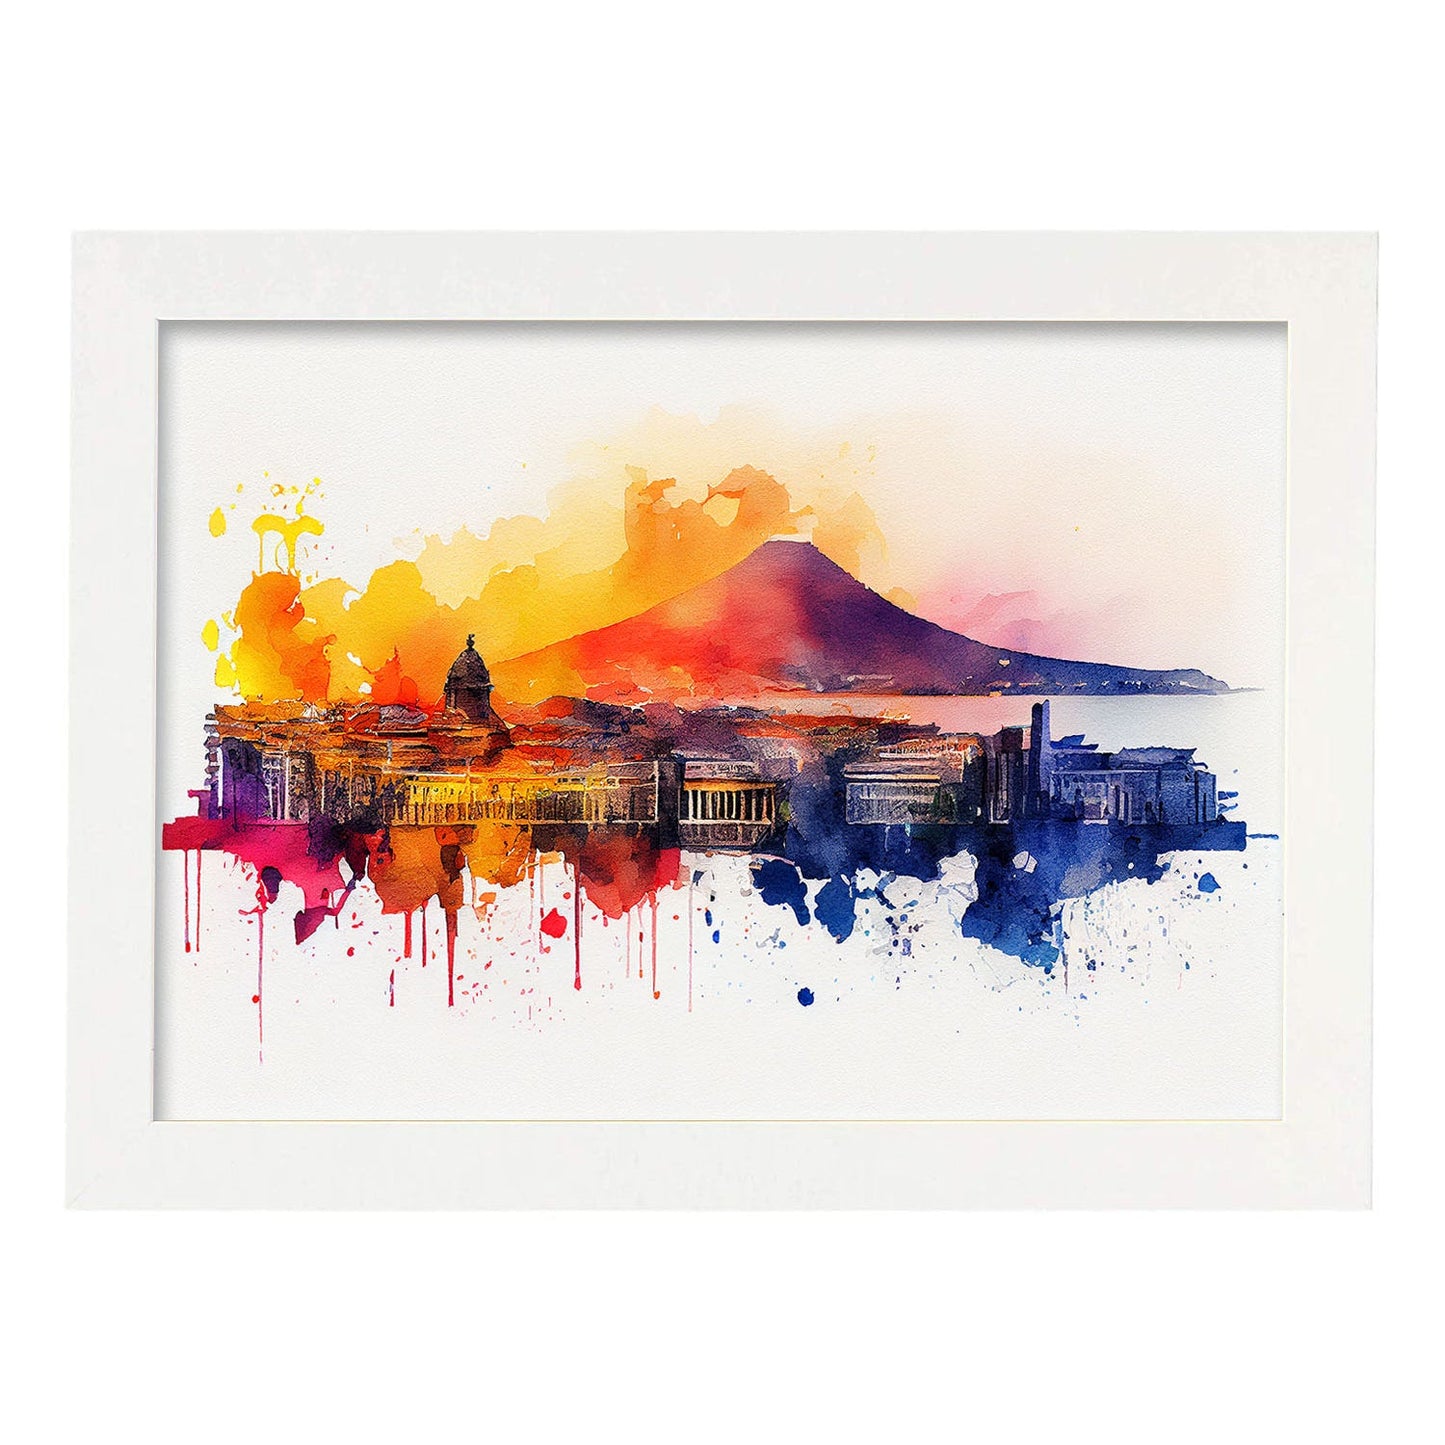 Nacnic watercolor of a skyline of the city of Naples. Aesthetic Wall Art Prints for Bedroom or Living Room Design.-Artwork-Nacnic-A4-Marco Blanco-Nacnic Estudio SL